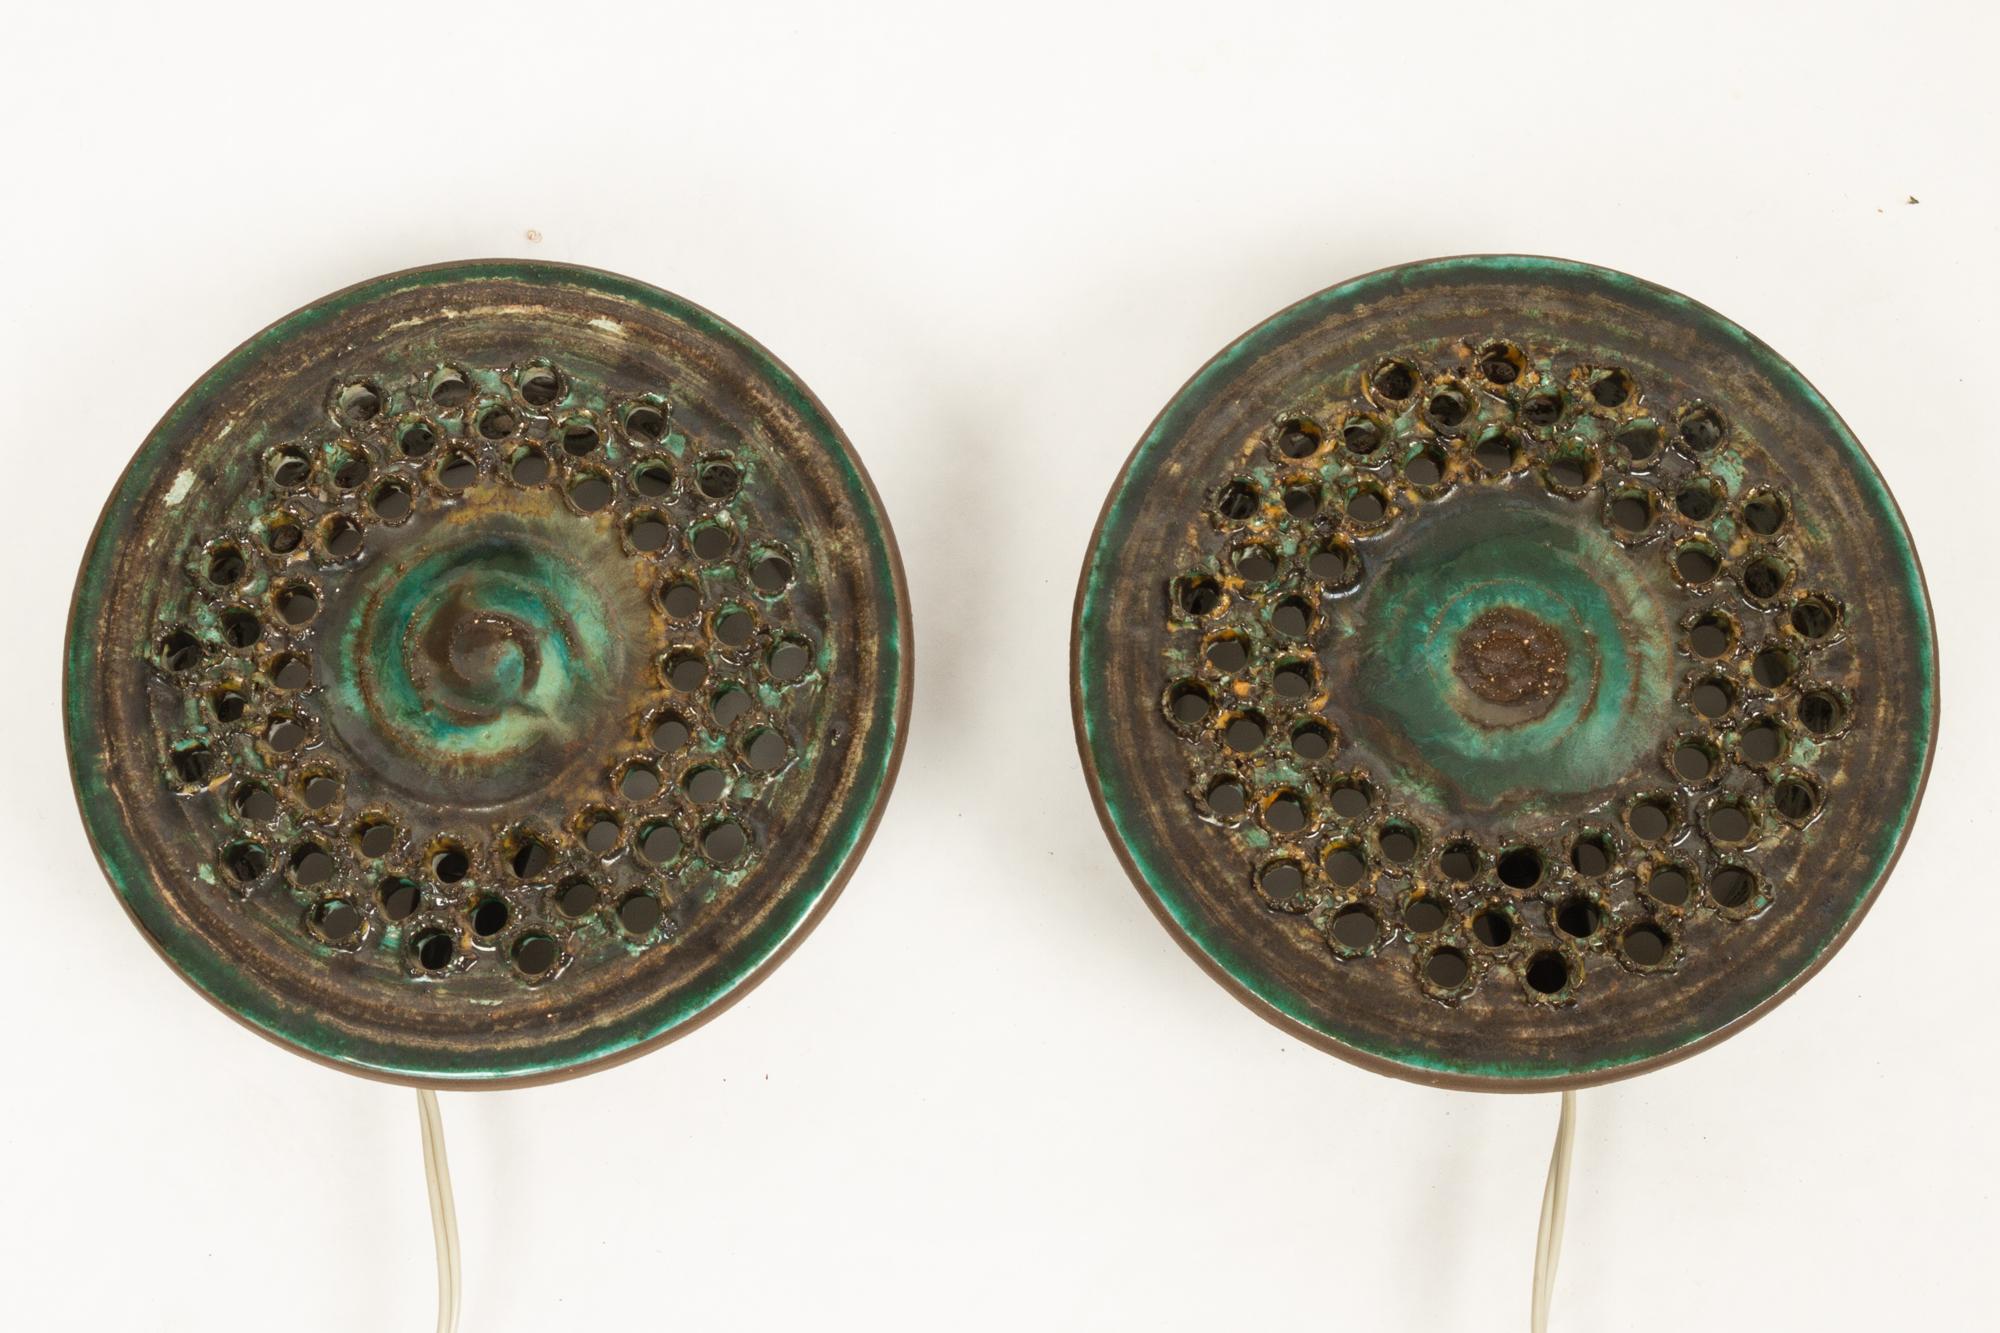 Vintage Danish ceramic sconces, 1960s, set of 2.
Pair of beautiful handmade ceramic wall lights by Danish ceramist Ib Oluf Hansen for Demstrup Keramik. Green and brown glazing.
Lamps stamped: Ib O. Demstrup DK 28-7-1975.
Very good condition,